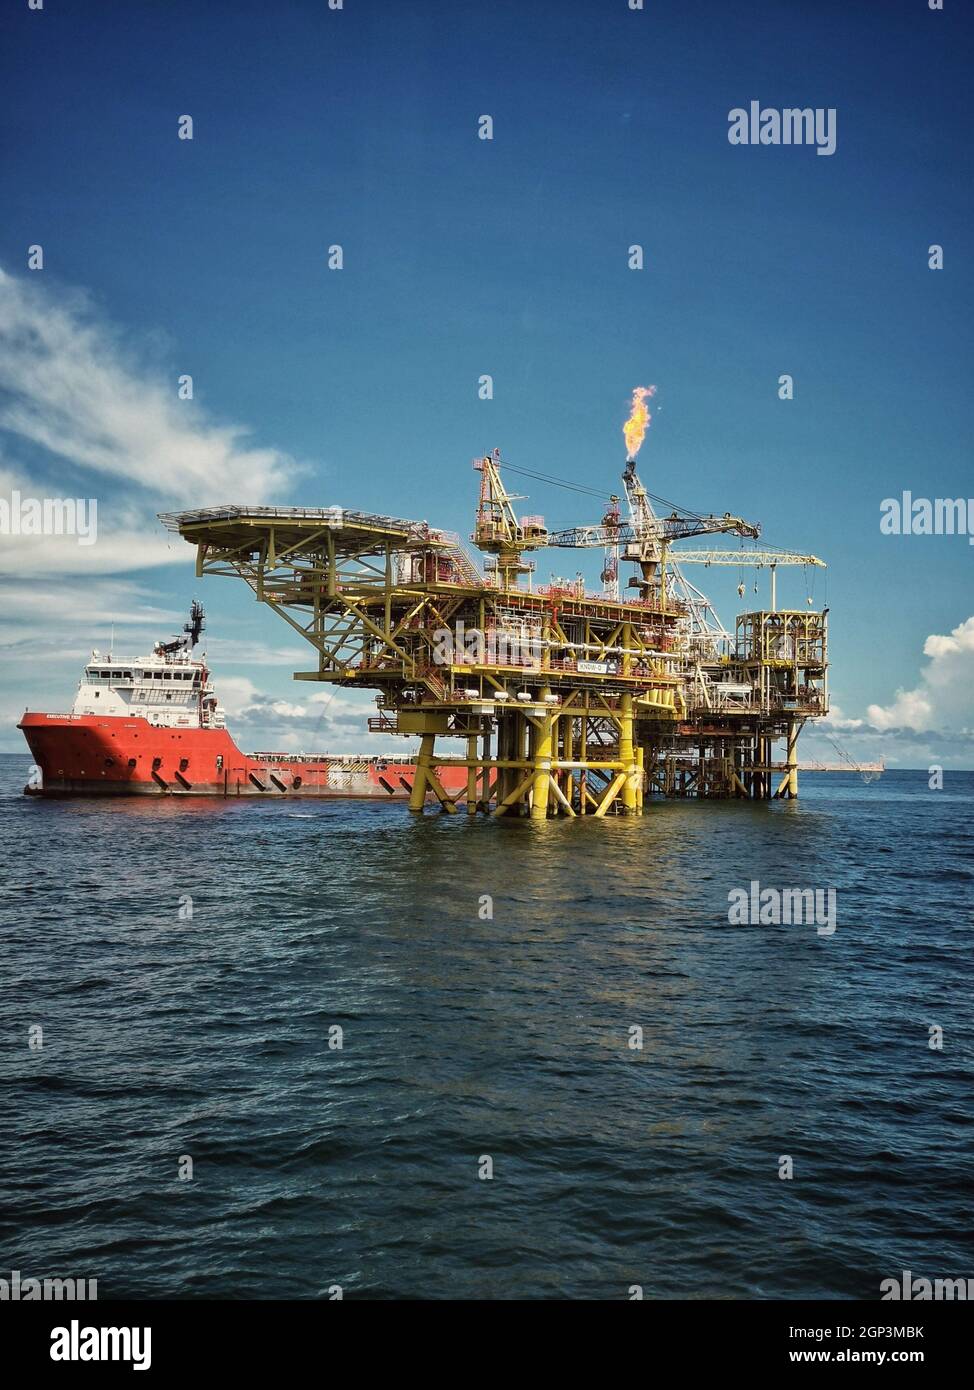 offshore support vessel stand by near oil platform at sea Stock Photo